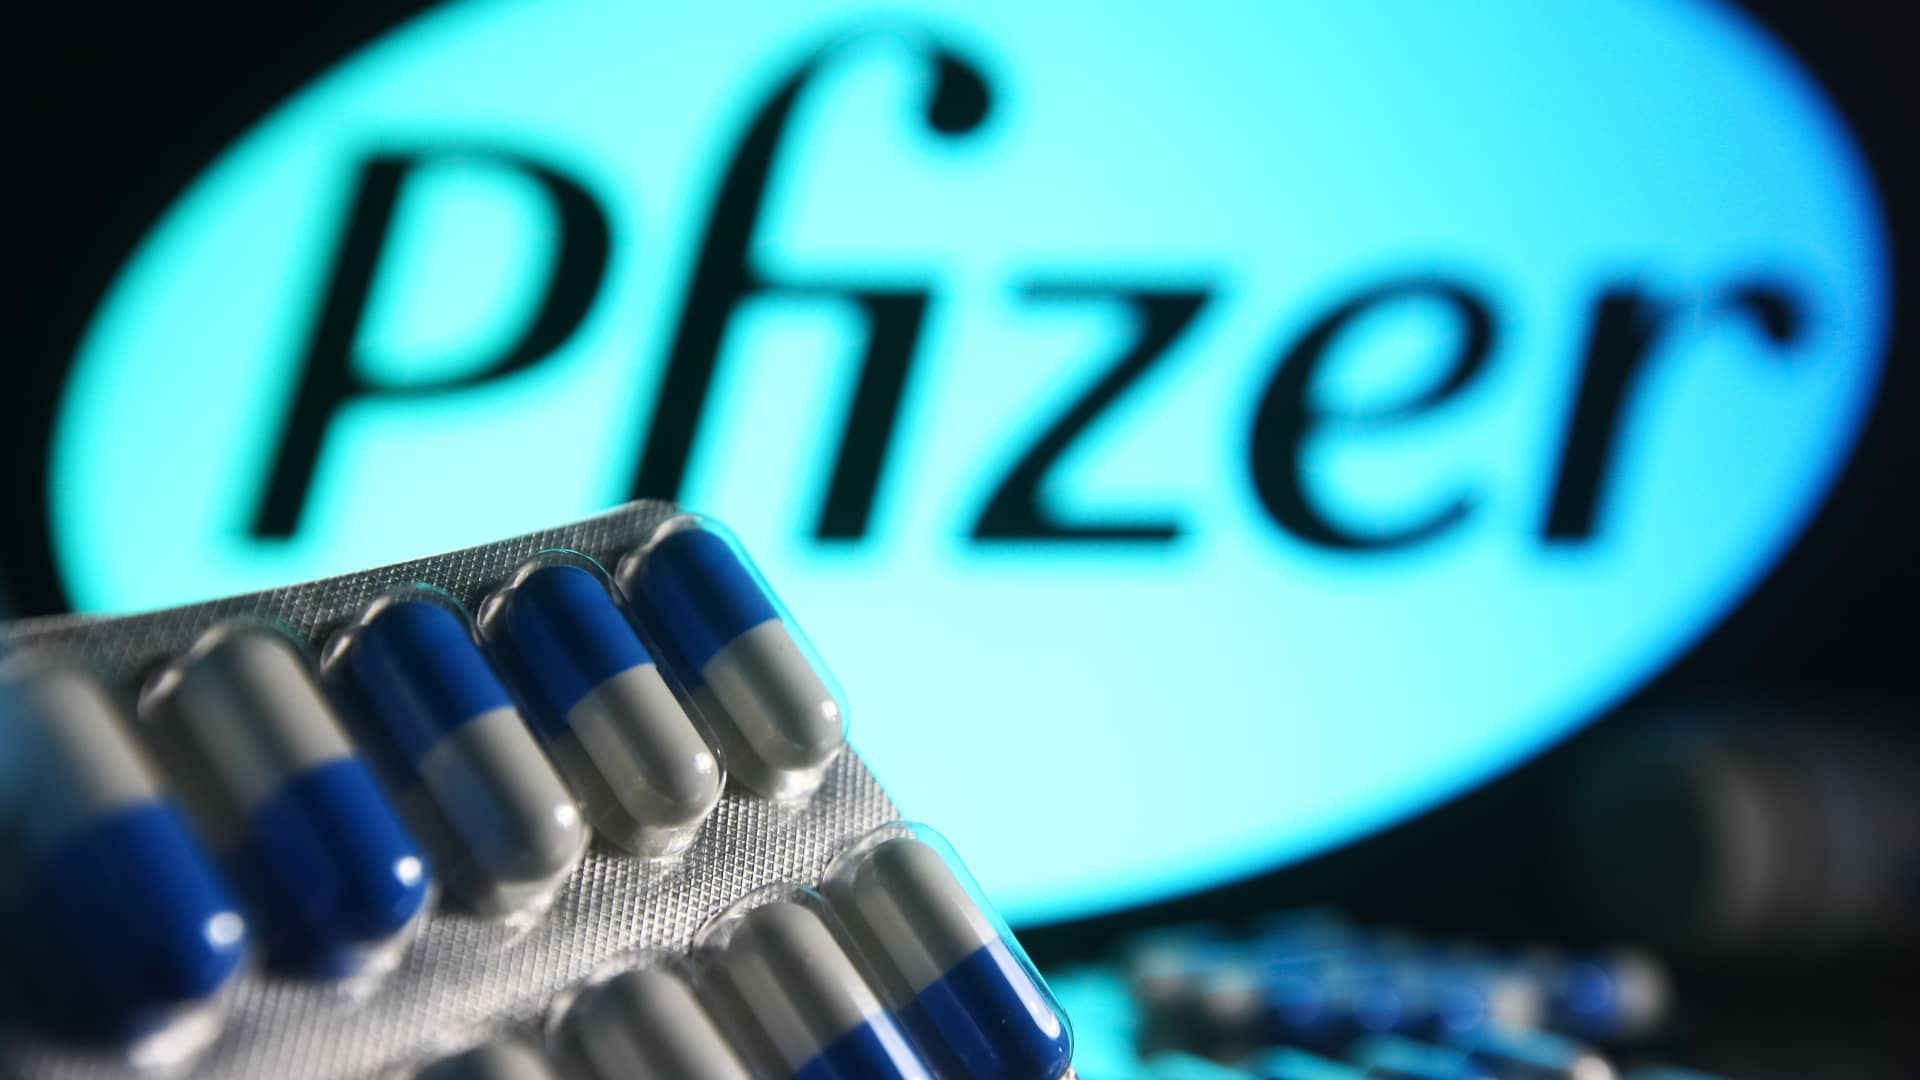 Pfizer to discontinue twice-daily weight loss pill due to high rates of adverse side effects